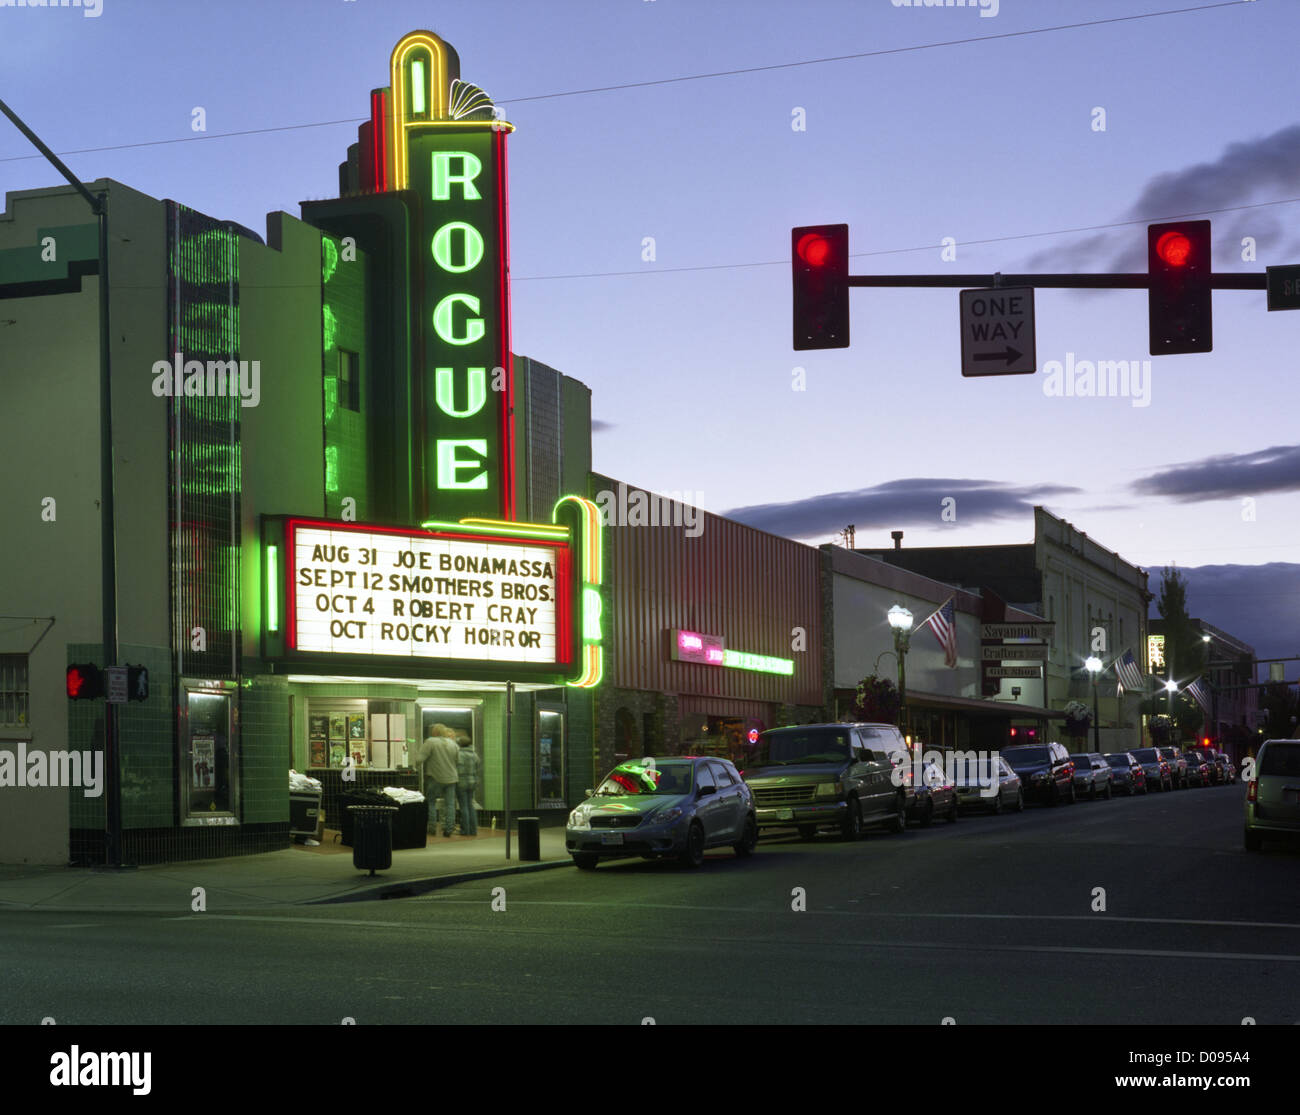 Grants pass oregon hi-res stock photography and images - Alamy